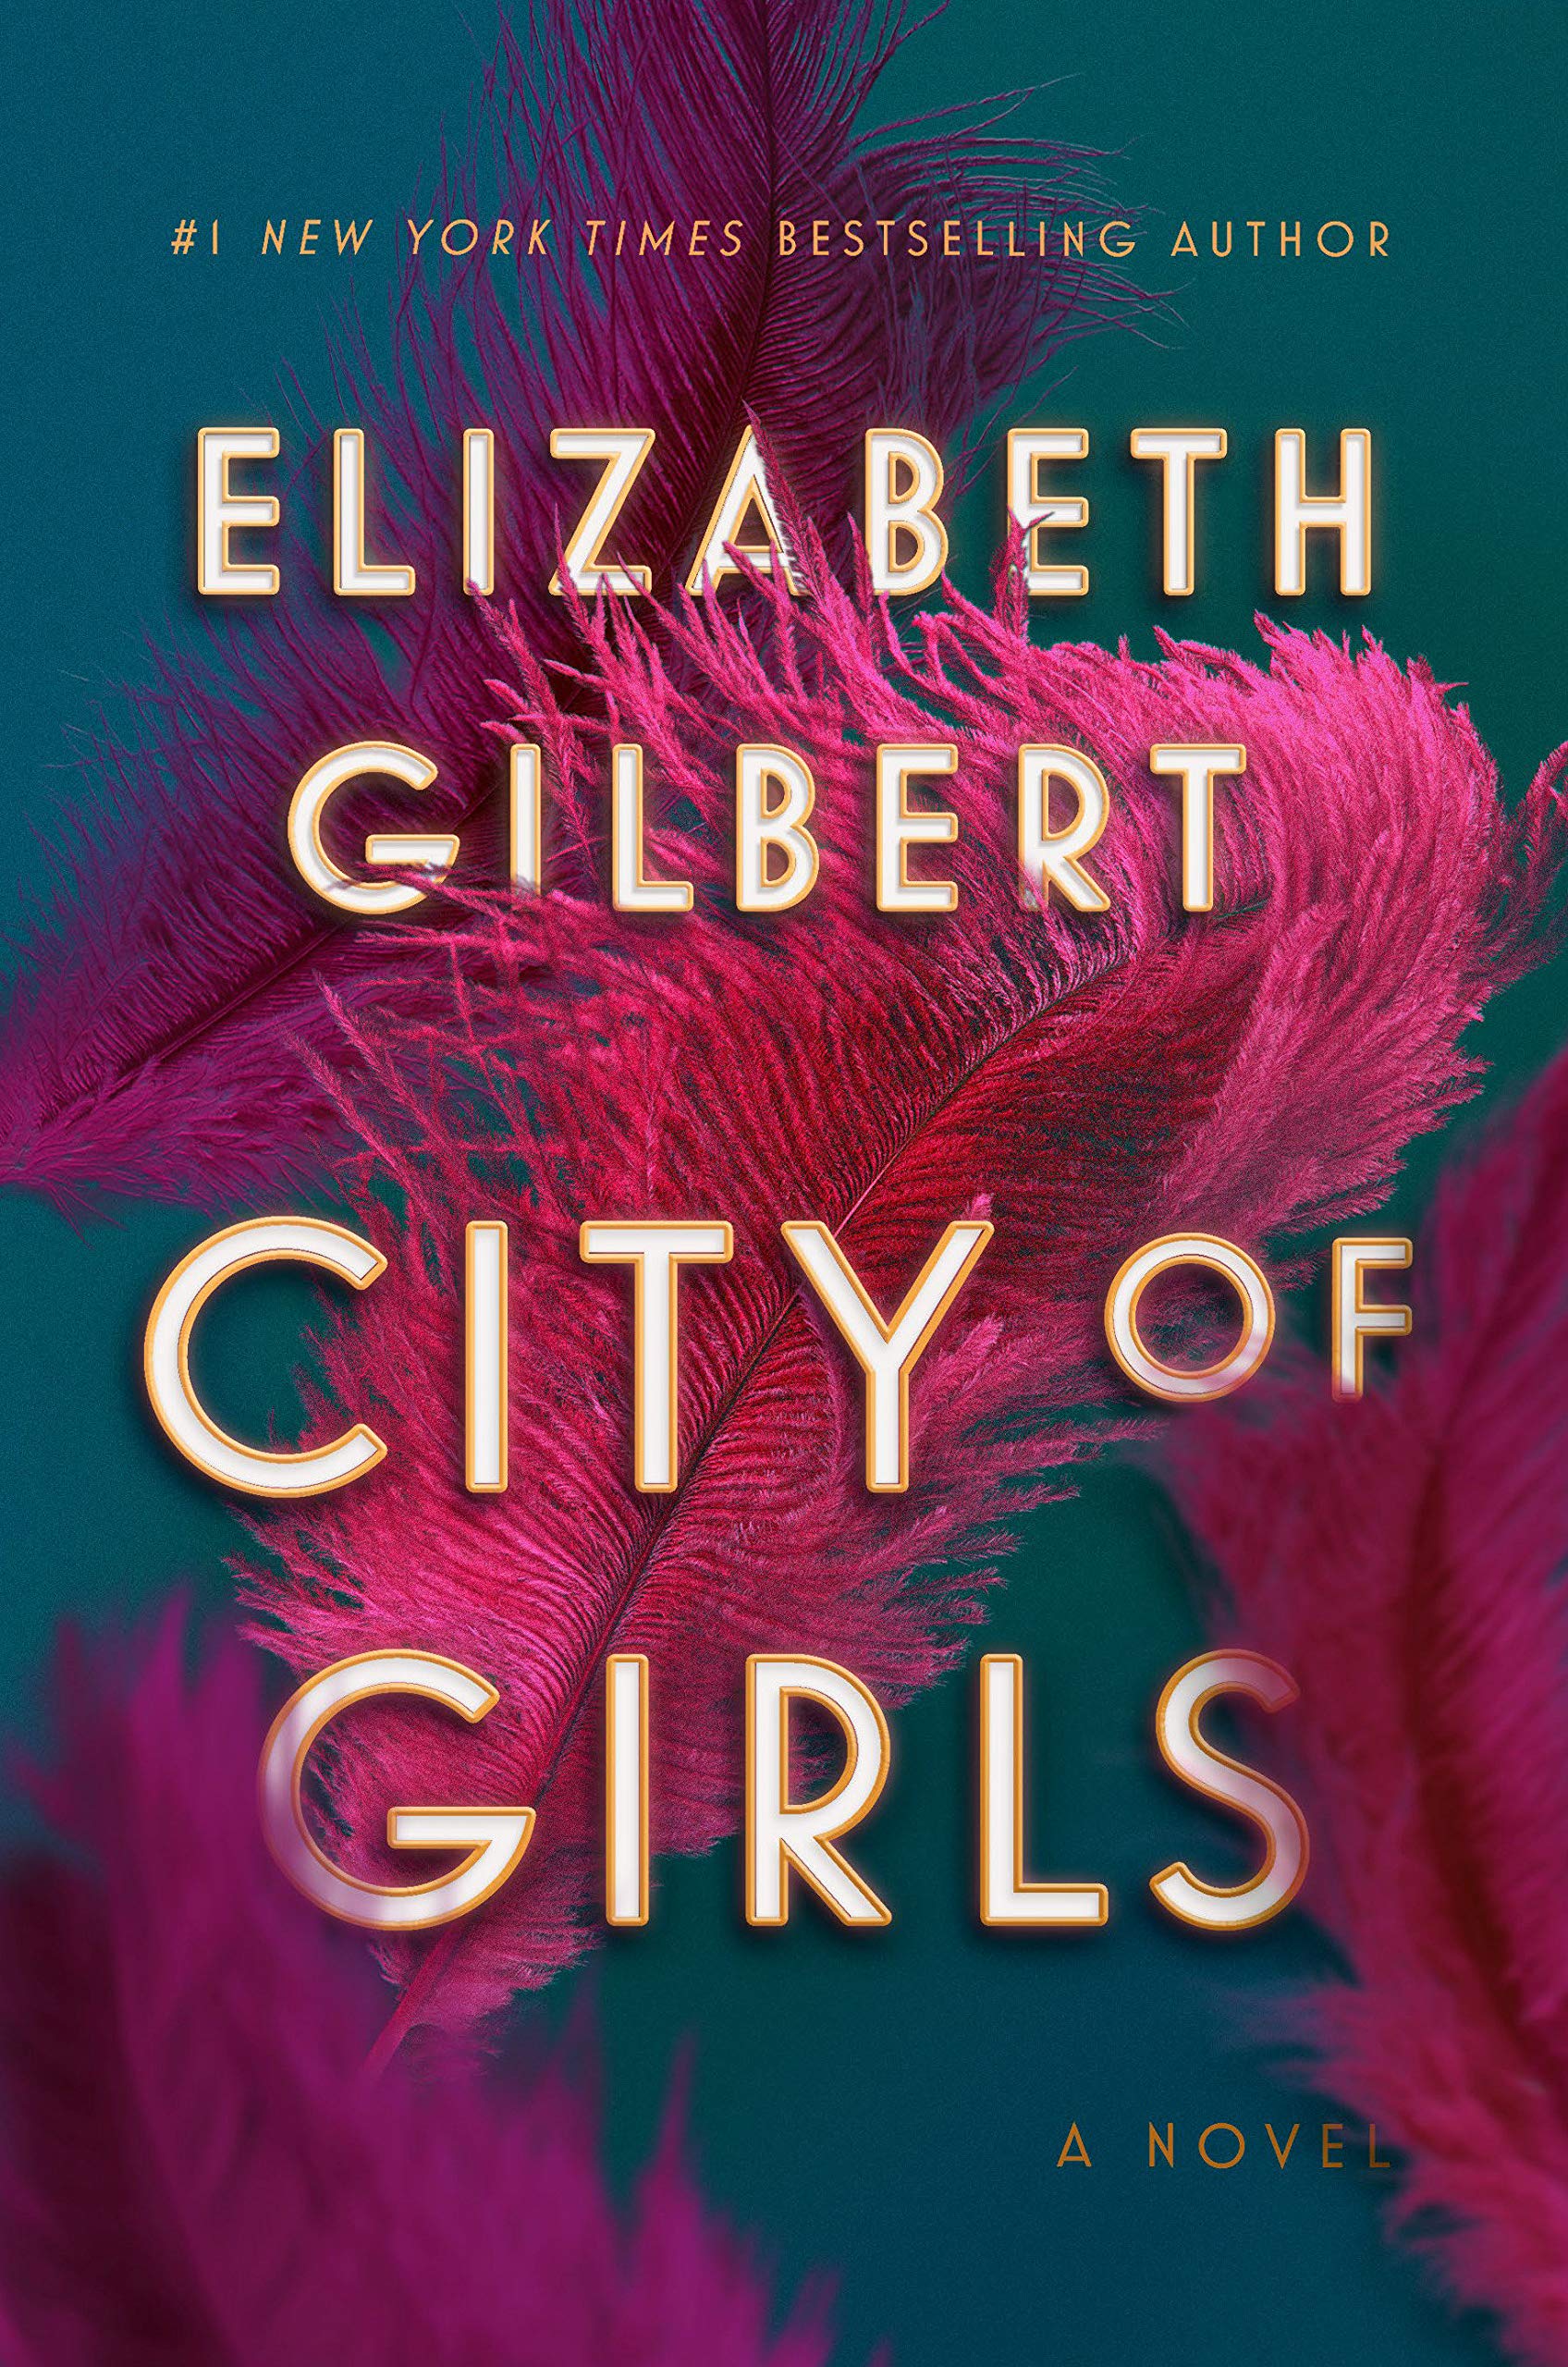 A vibrant book cover featuring the title "city of girls" by elizabeth gilbert, with luscious pink feathers creating a dynamic and flamboyant backdrop, signifying a sense of boldness and vivacity.